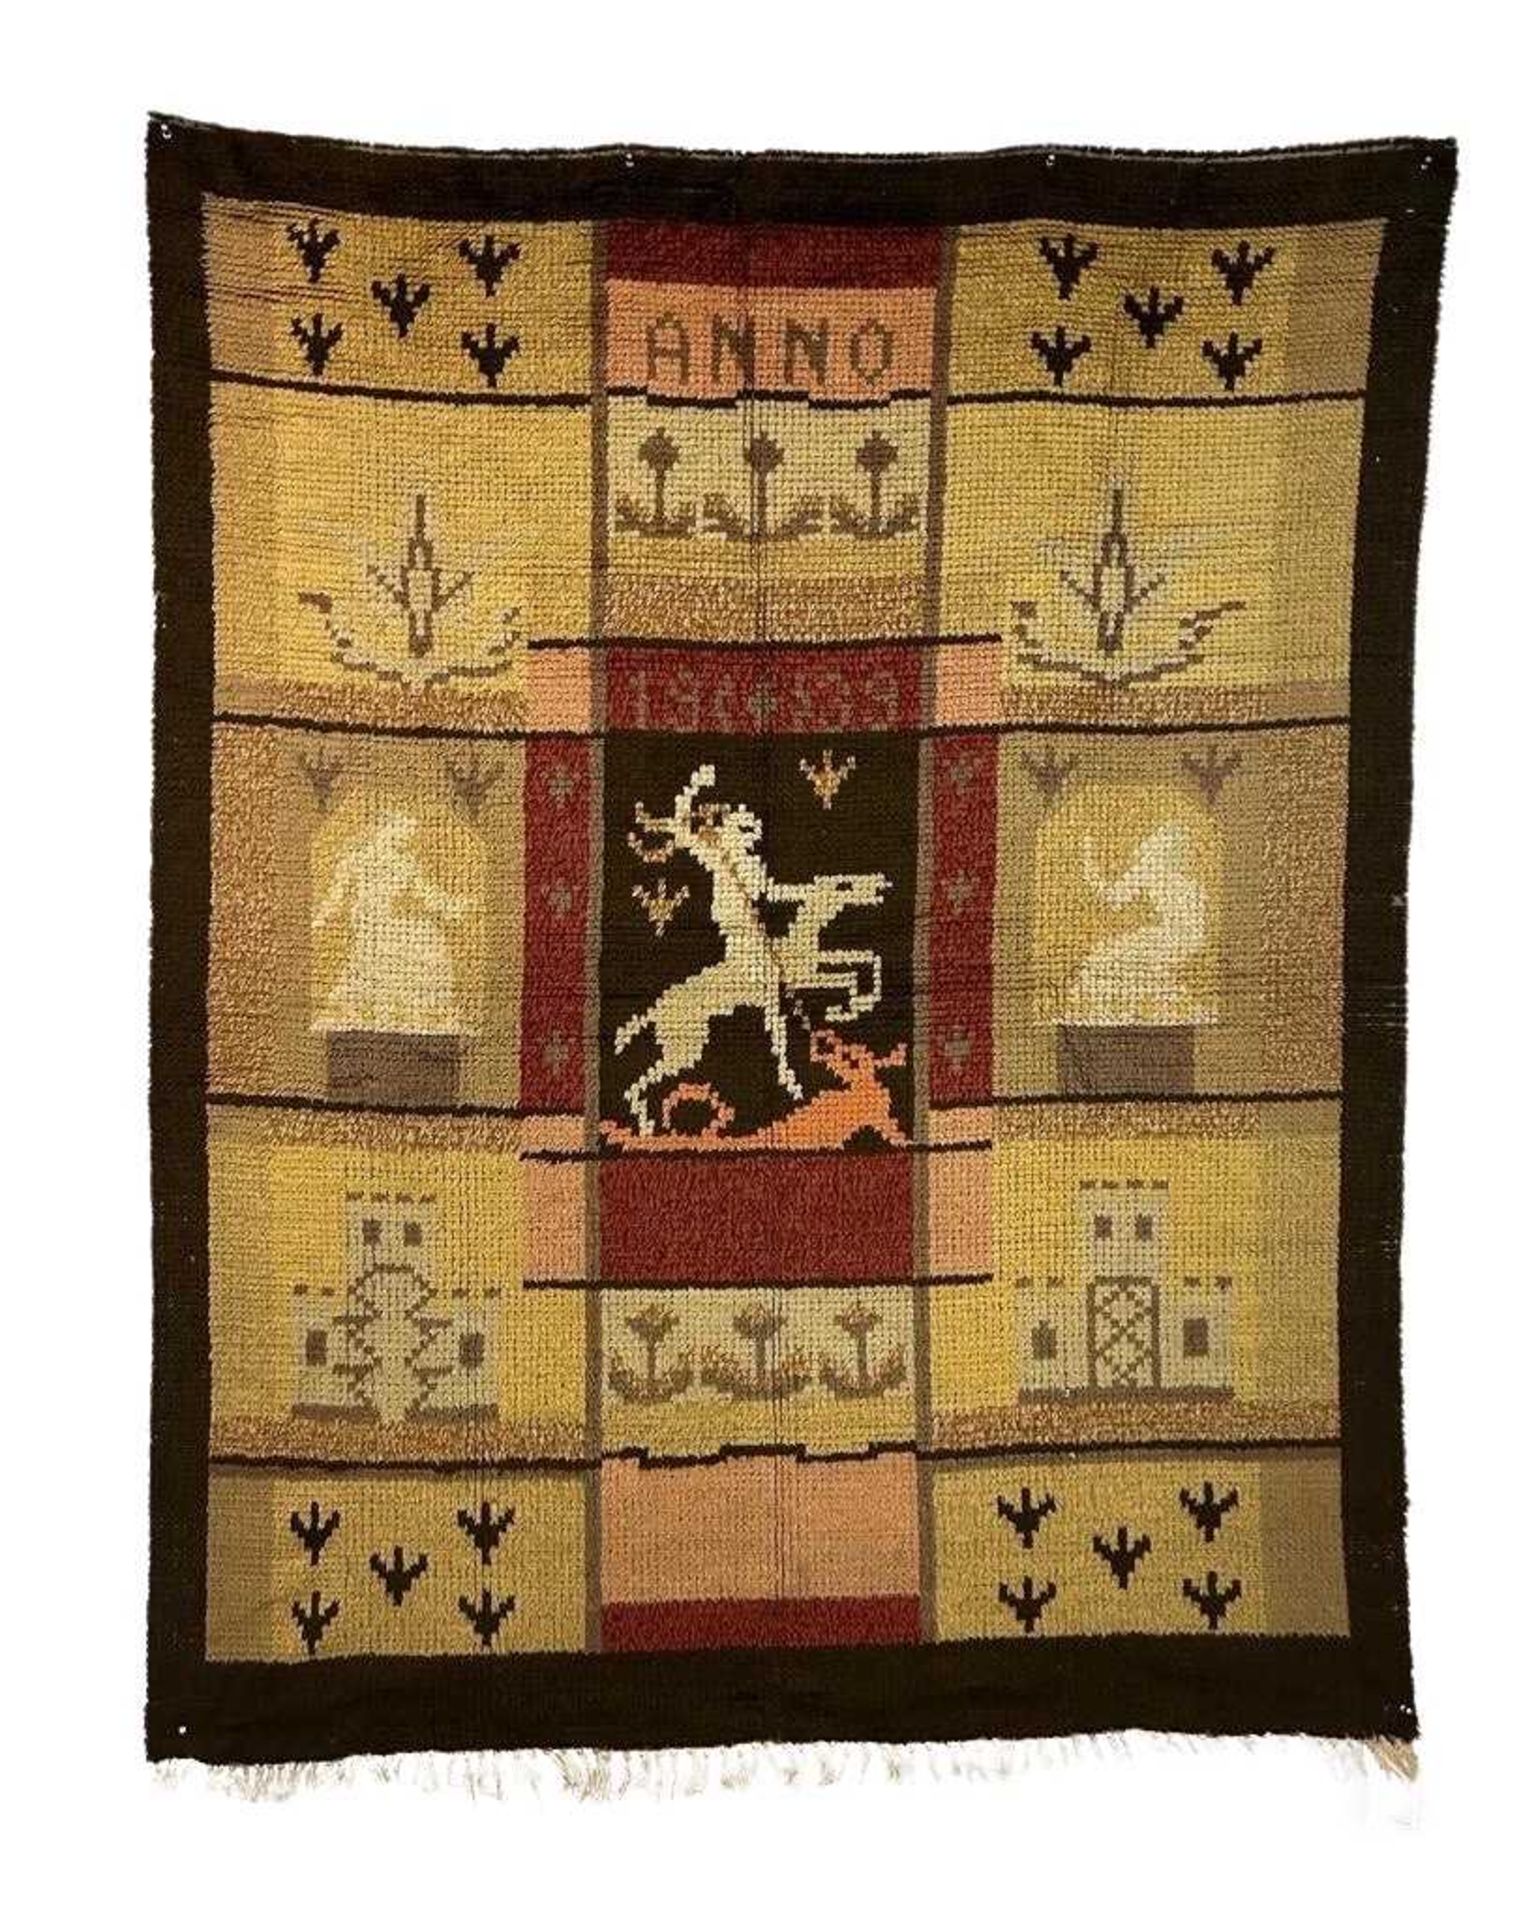 A 1930'S SCANDINAVIAN WOOL PILE RUG DEPICTING ST GEORGE AND THE DRAGON, DATED 1939